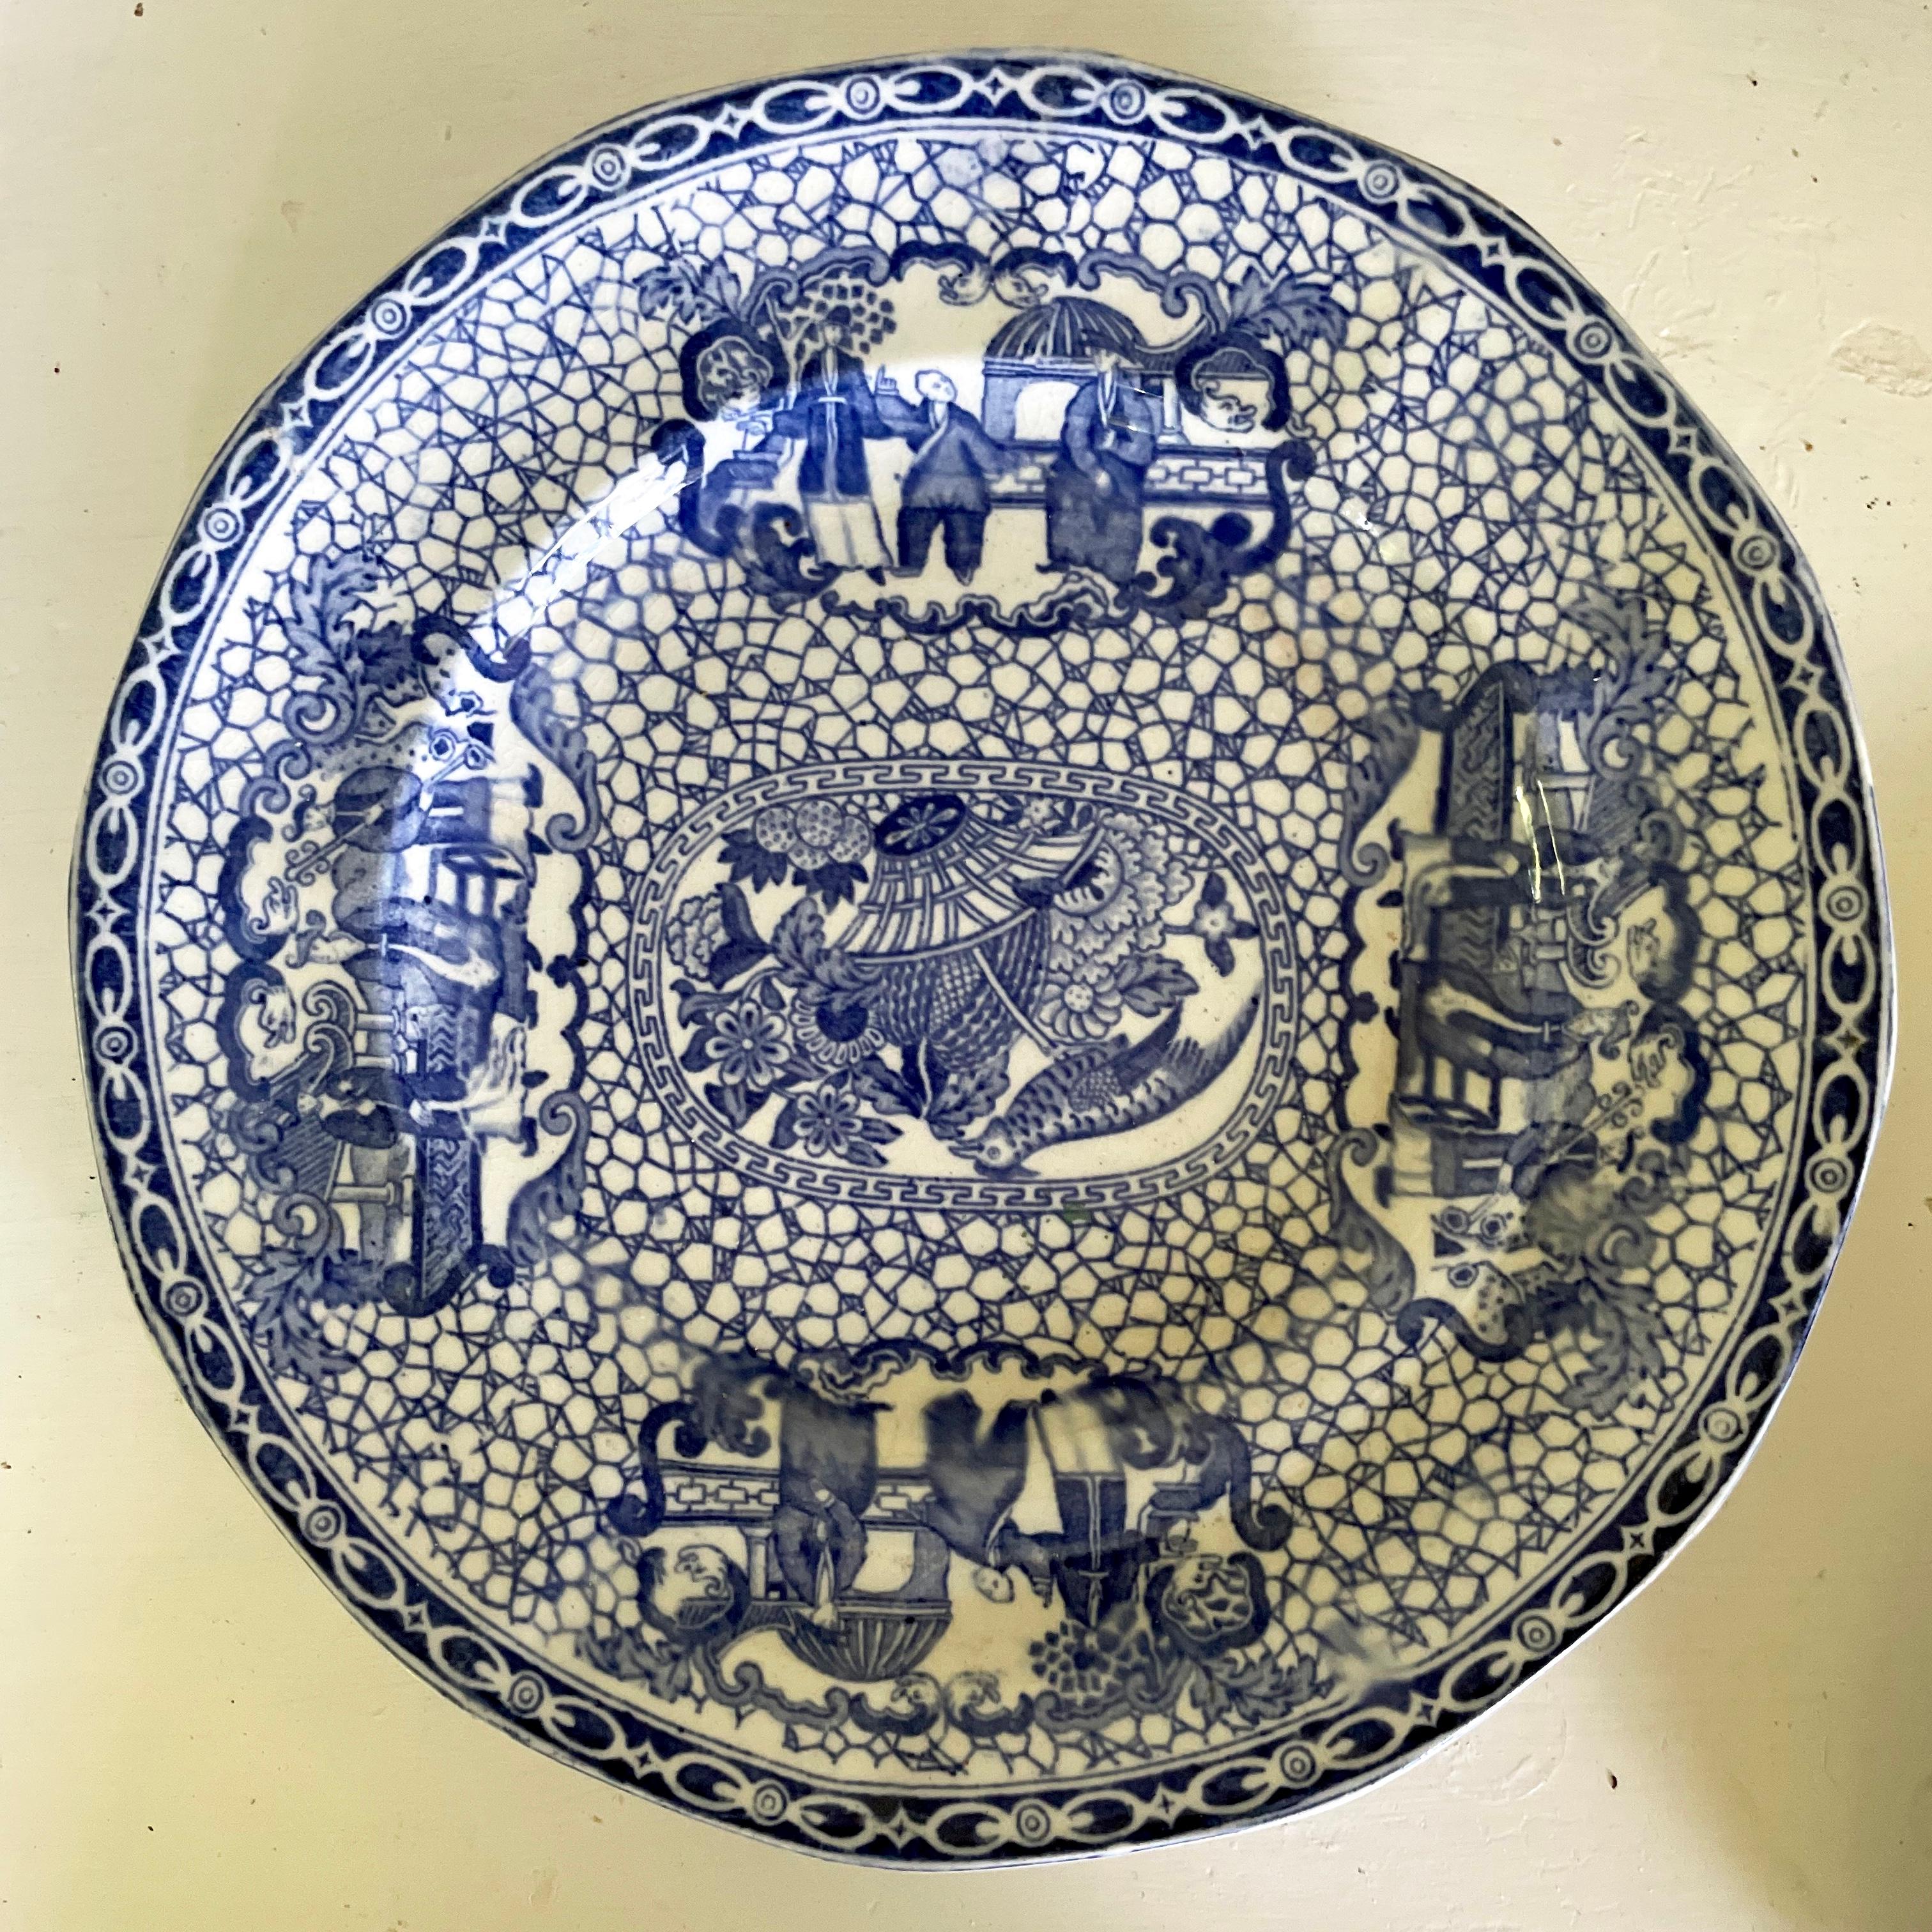 Set of six blue and white Chinese bird plates. Early 20th c. English blue and white ironstone plates. Blue underglaze pattern markings for Wm Adams. 
Dimension: 2 dinner plates 10” diameter x 1 1/8” height; 4 luncheon plates 9